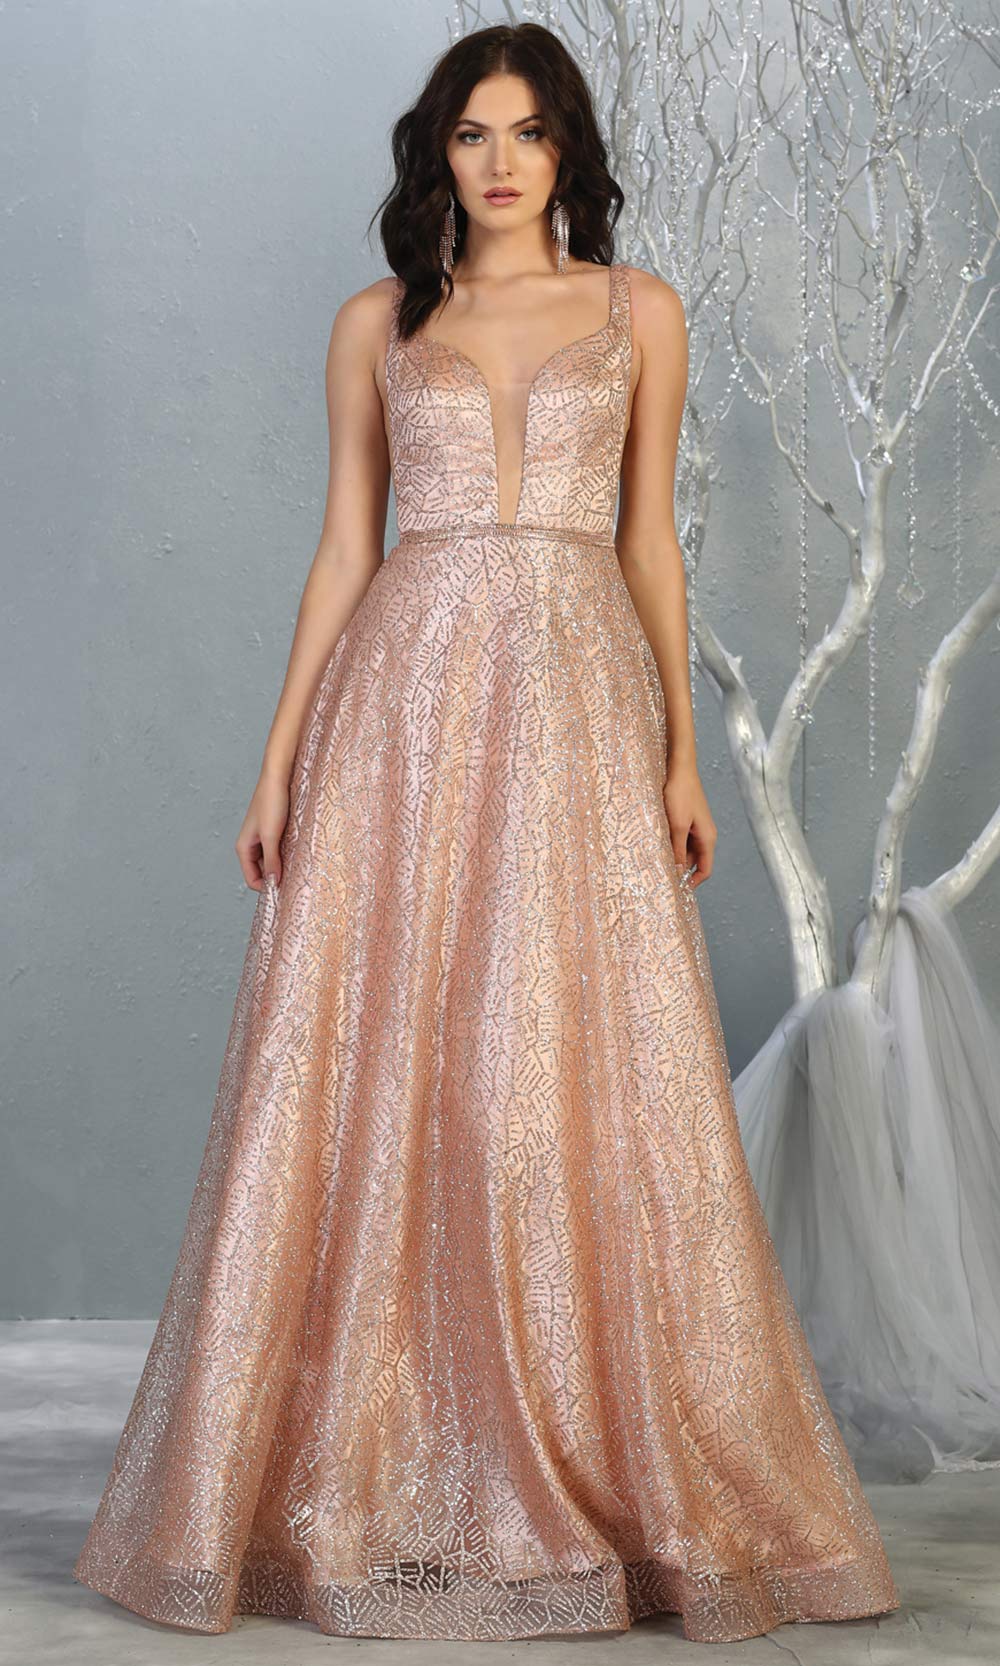 Mayqueen MQ1771 long rose gold v neck flowy glittery sequin dress with low back. Perfect for prom, engagement dress, e-shoot dress, formal wedding guest dress, debut, quinceanera, sweet 16, gala. Plus sizes avail in this rose gold semi ballgown.jpg